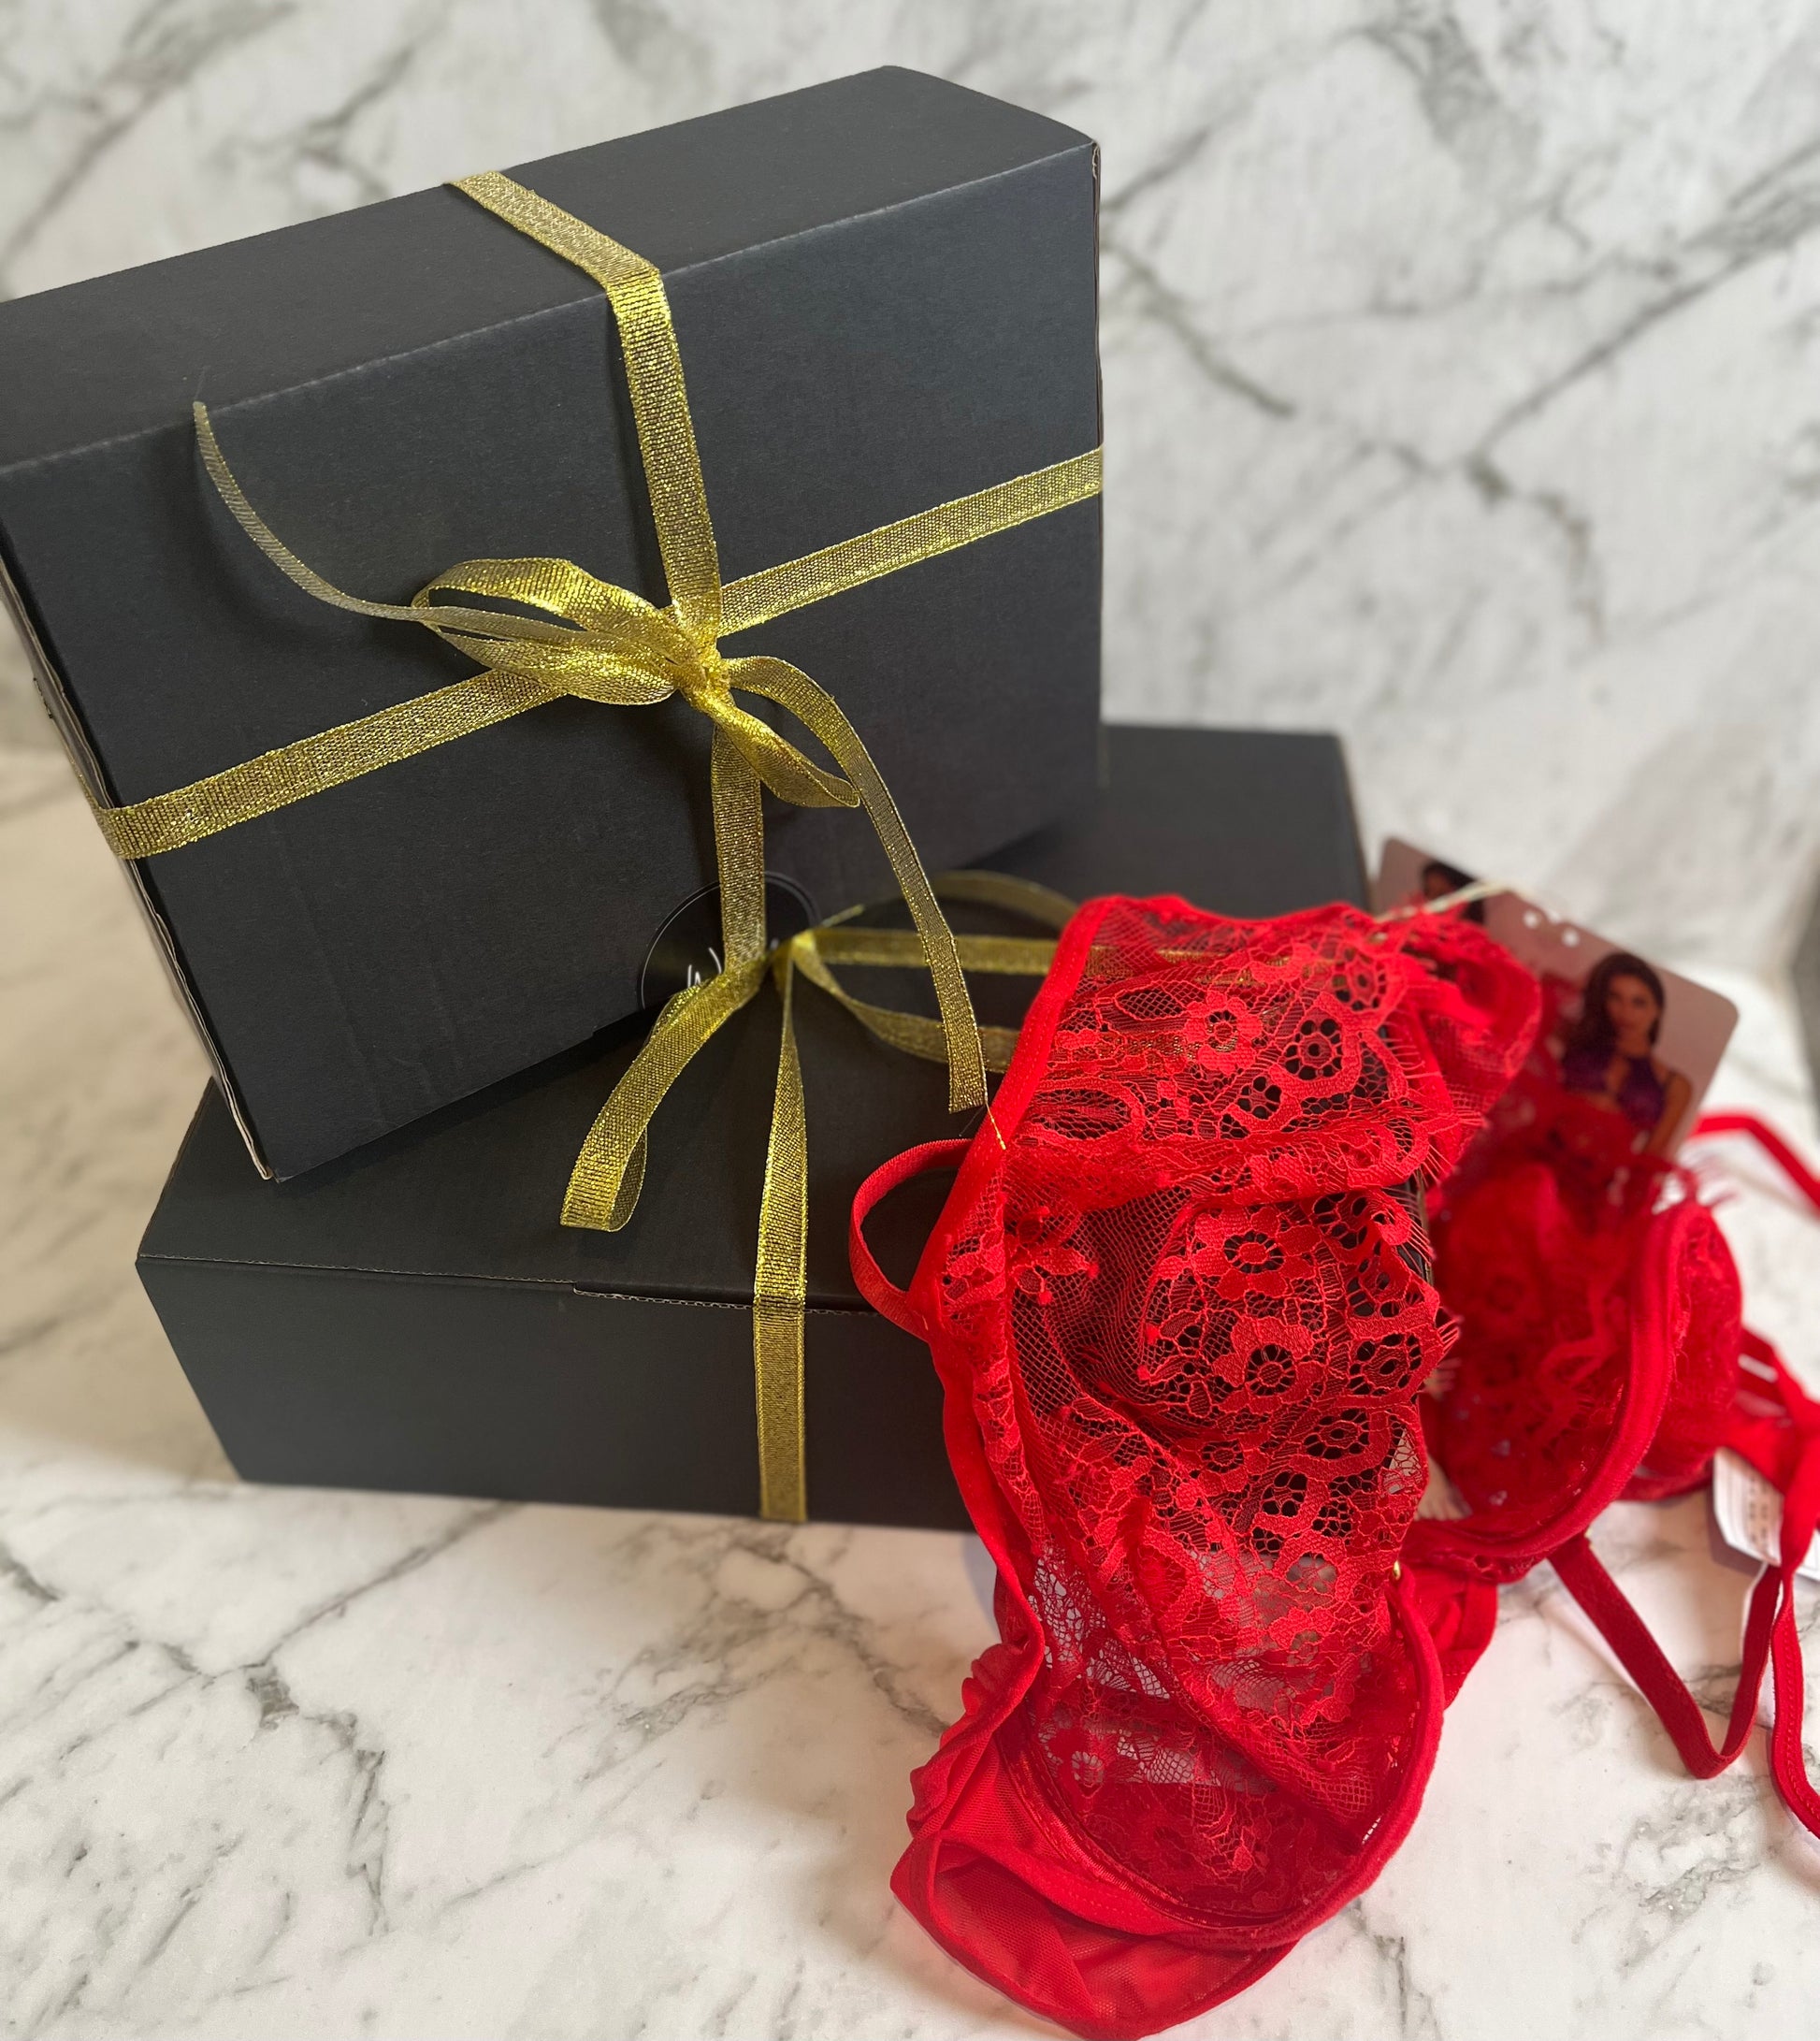 Gold limited edition lingerie gift box – Wild Cherry Lingerie